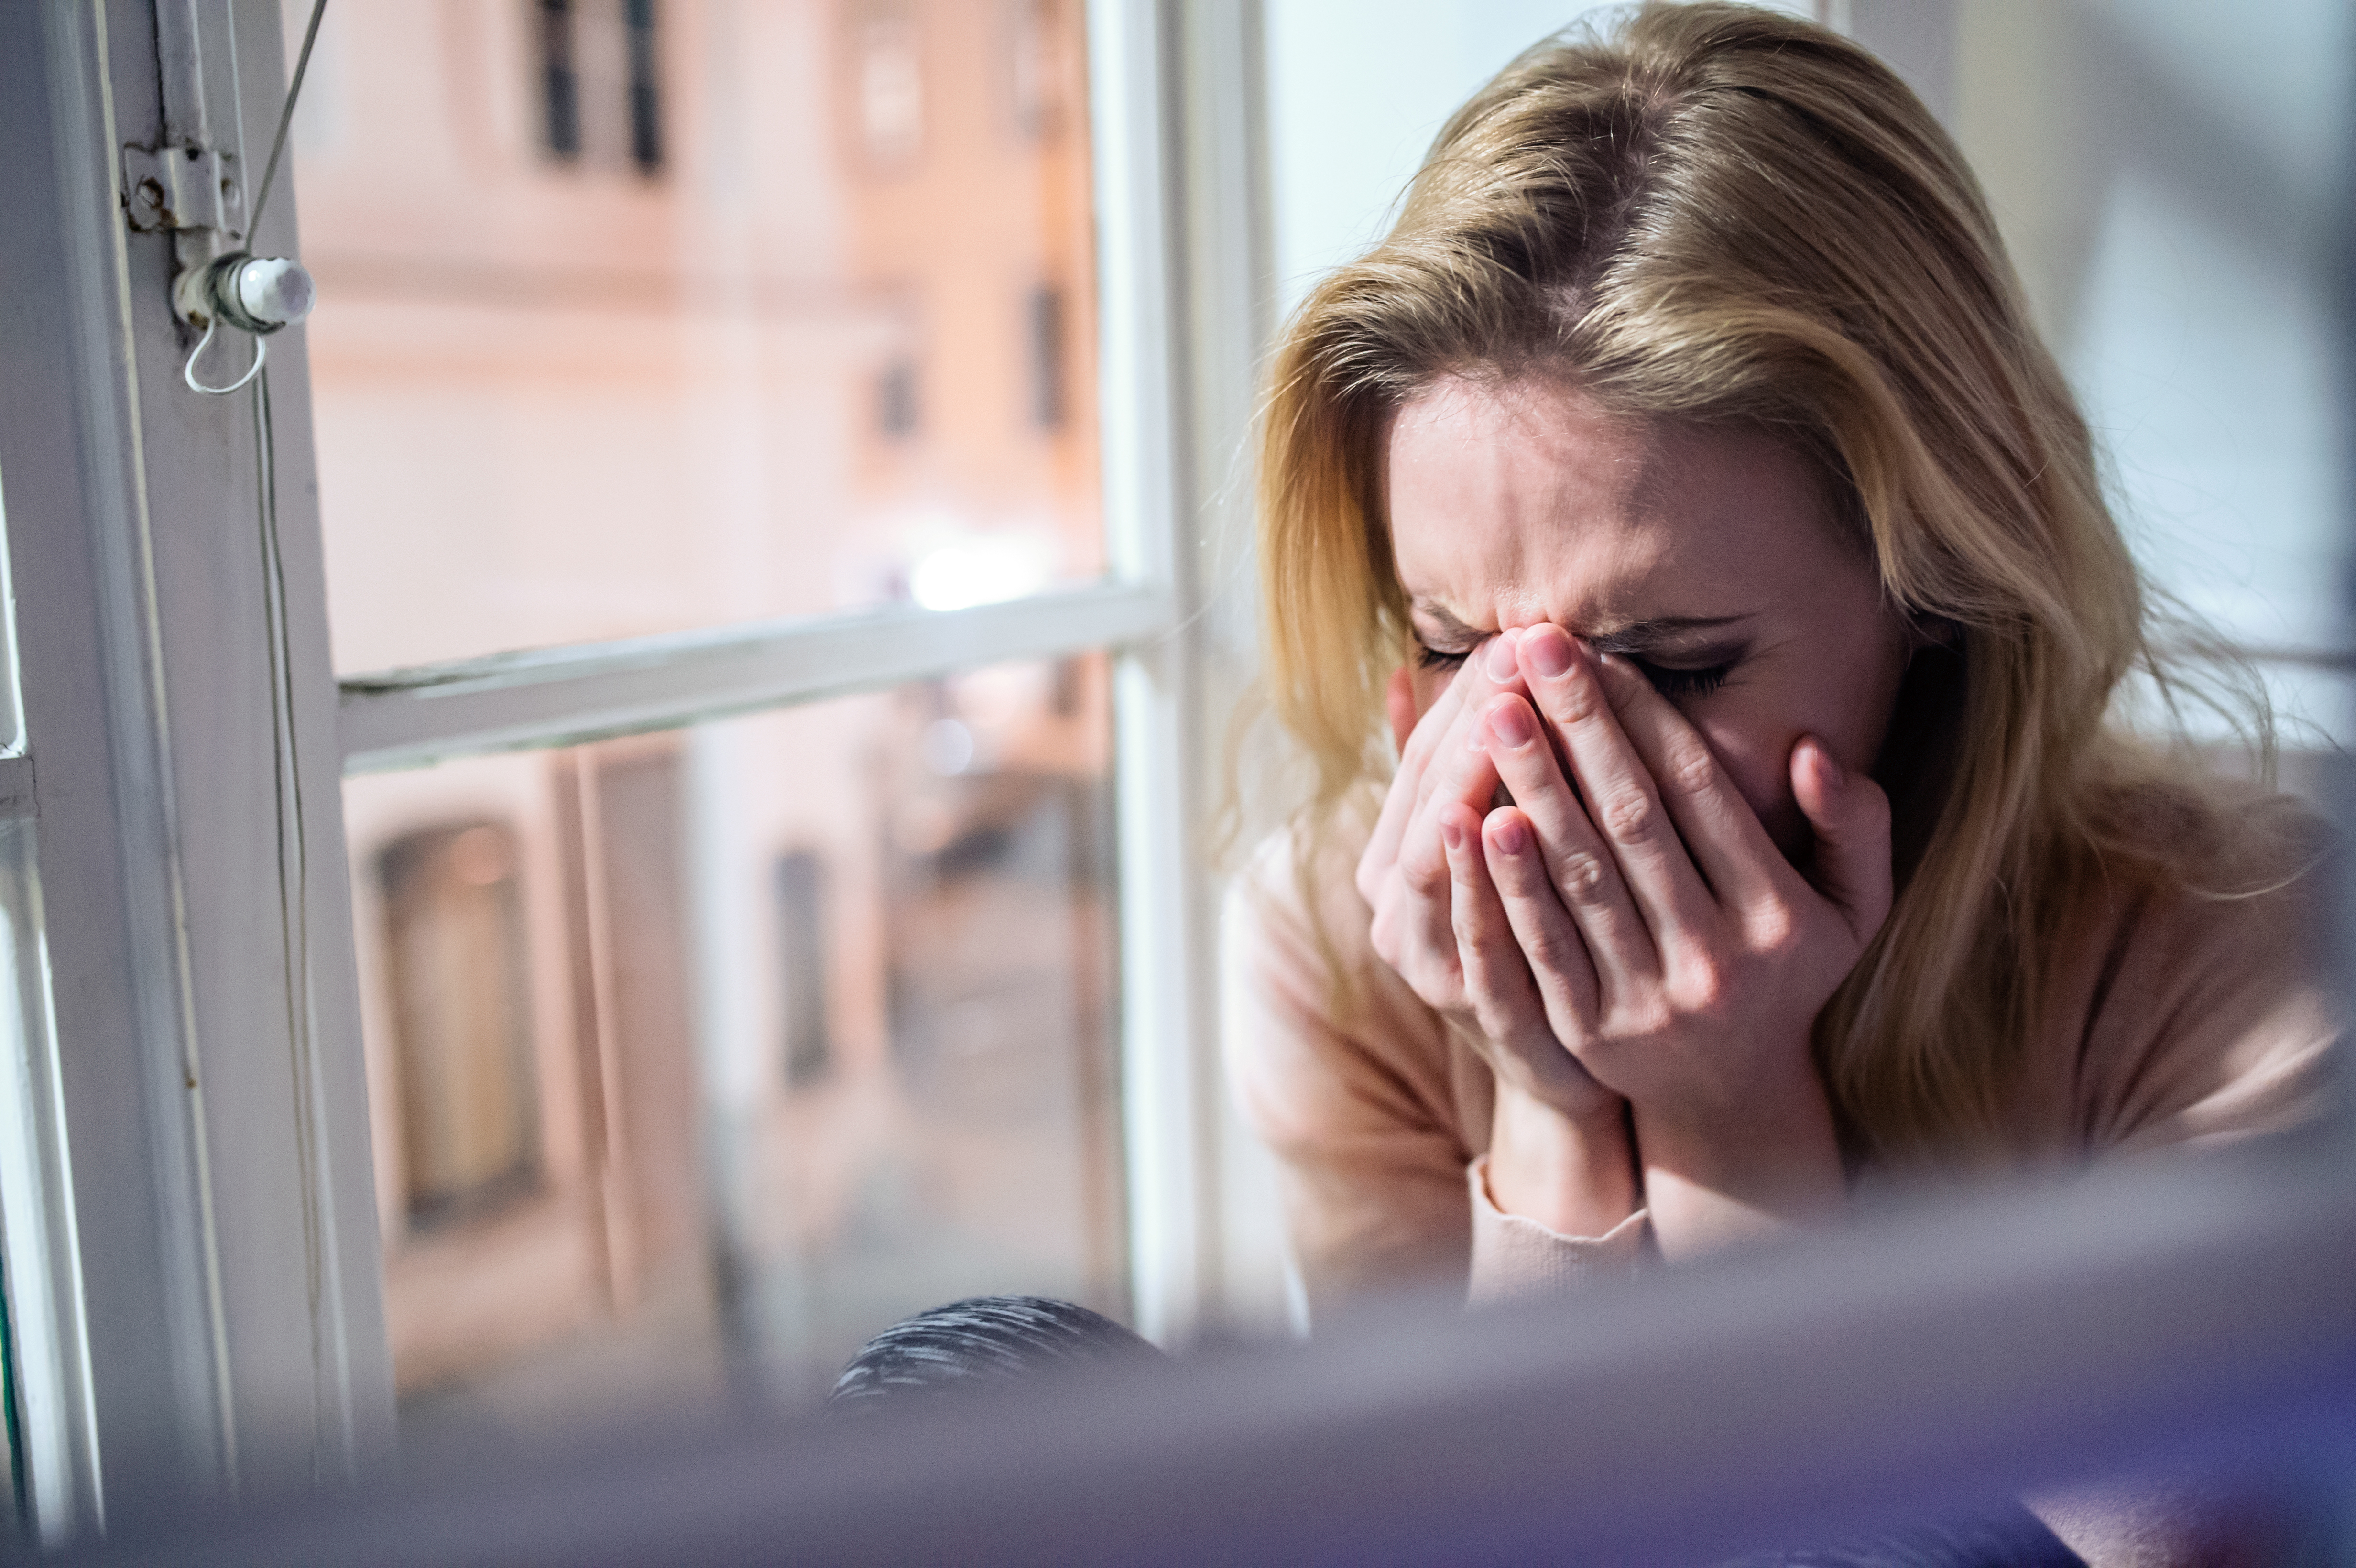 Woman sitting on windowsill, looking out of window, crying. | Source: Shutterstock